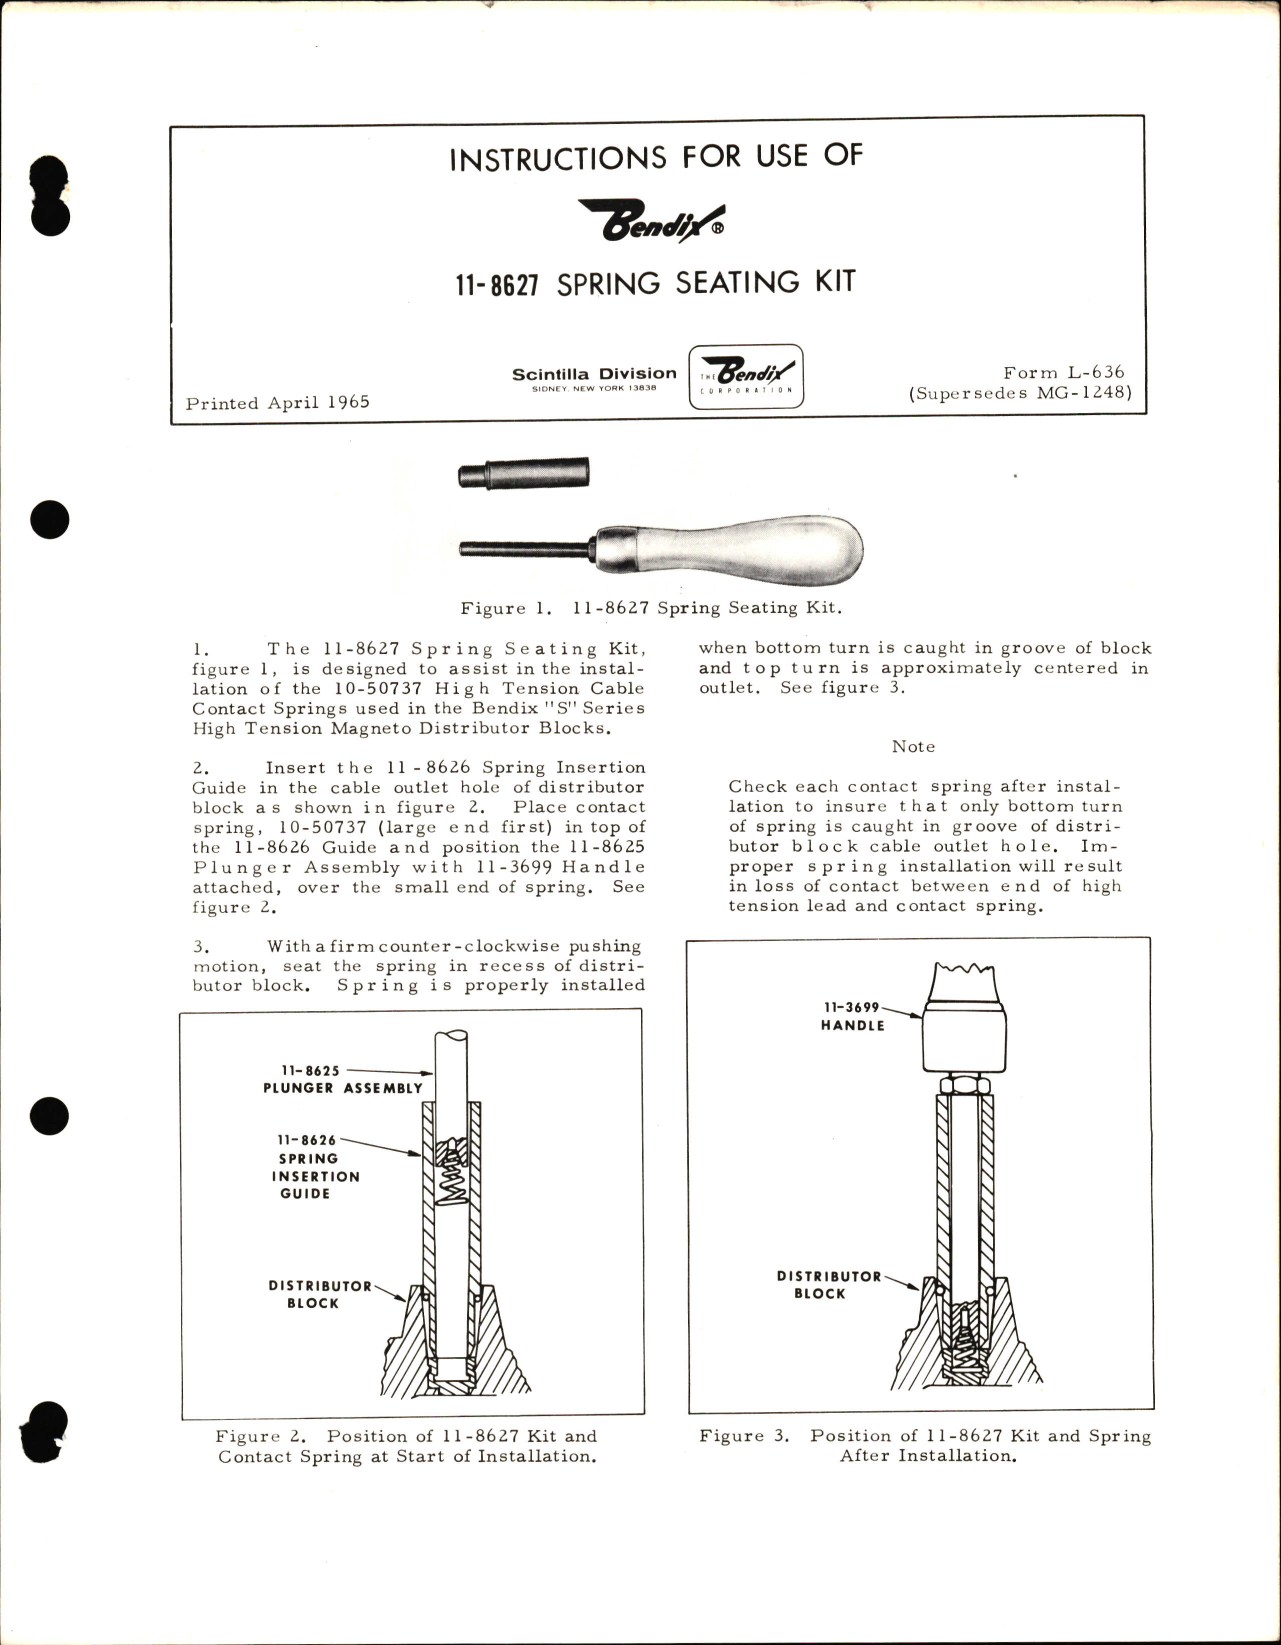 Sample page 1 from AirCorps Library document: Instructions for use of Bendix 11-8627 Spring Seating Kit